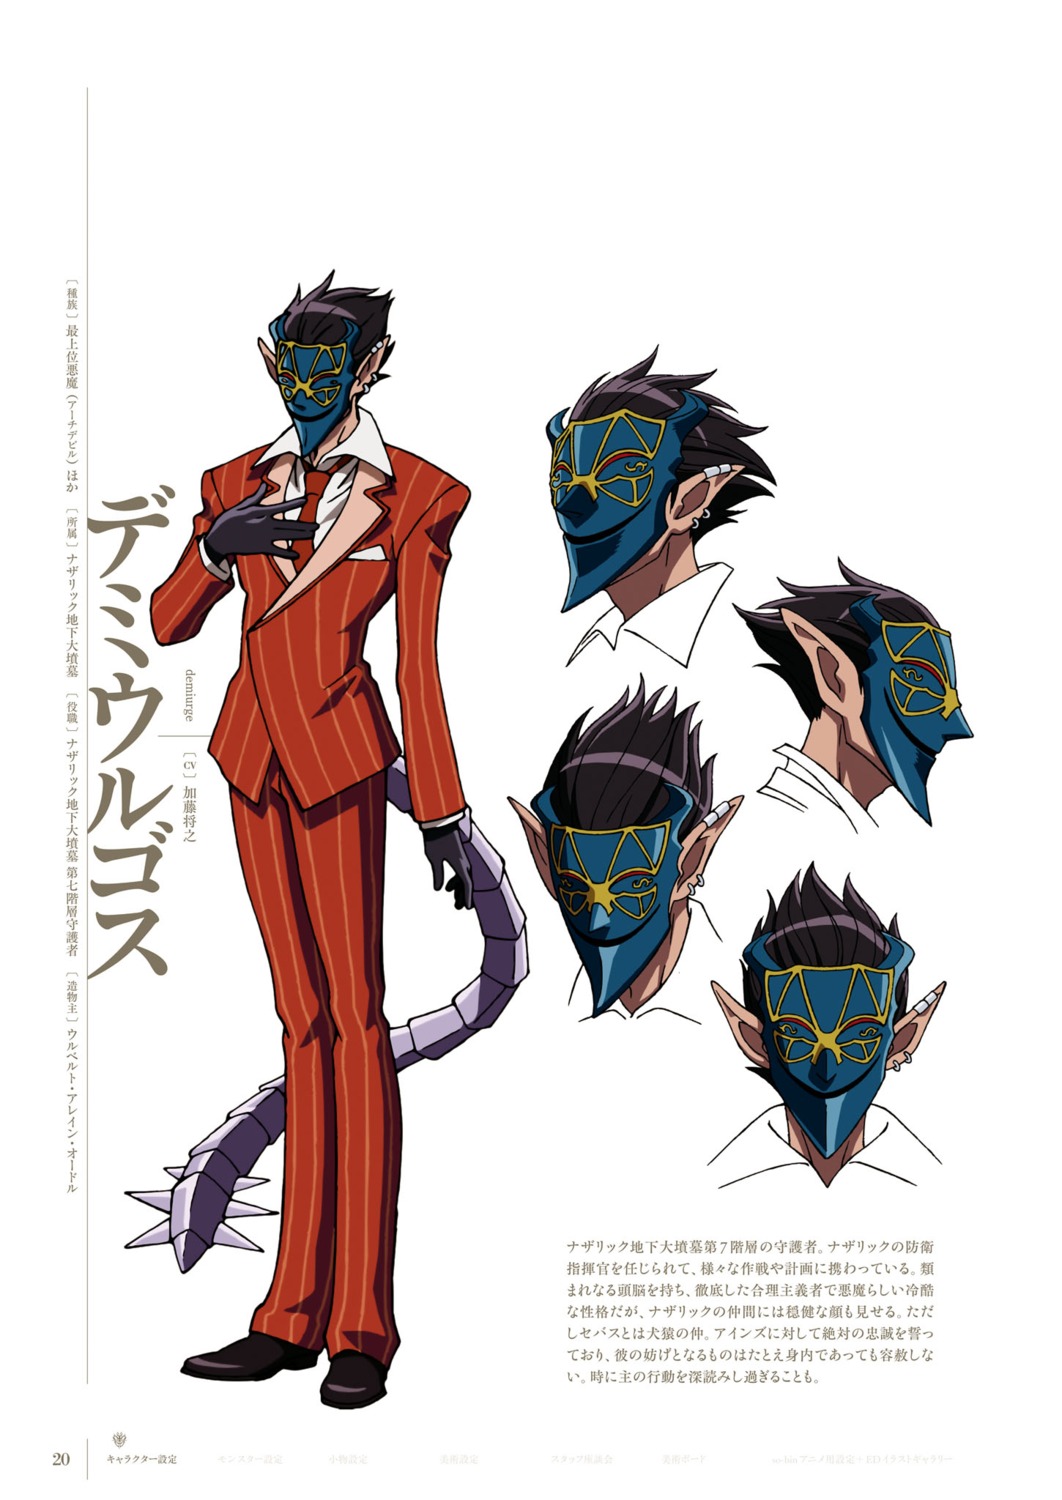 Overlord Demiurge Business Suit Pointy Ears Tail Yande Re